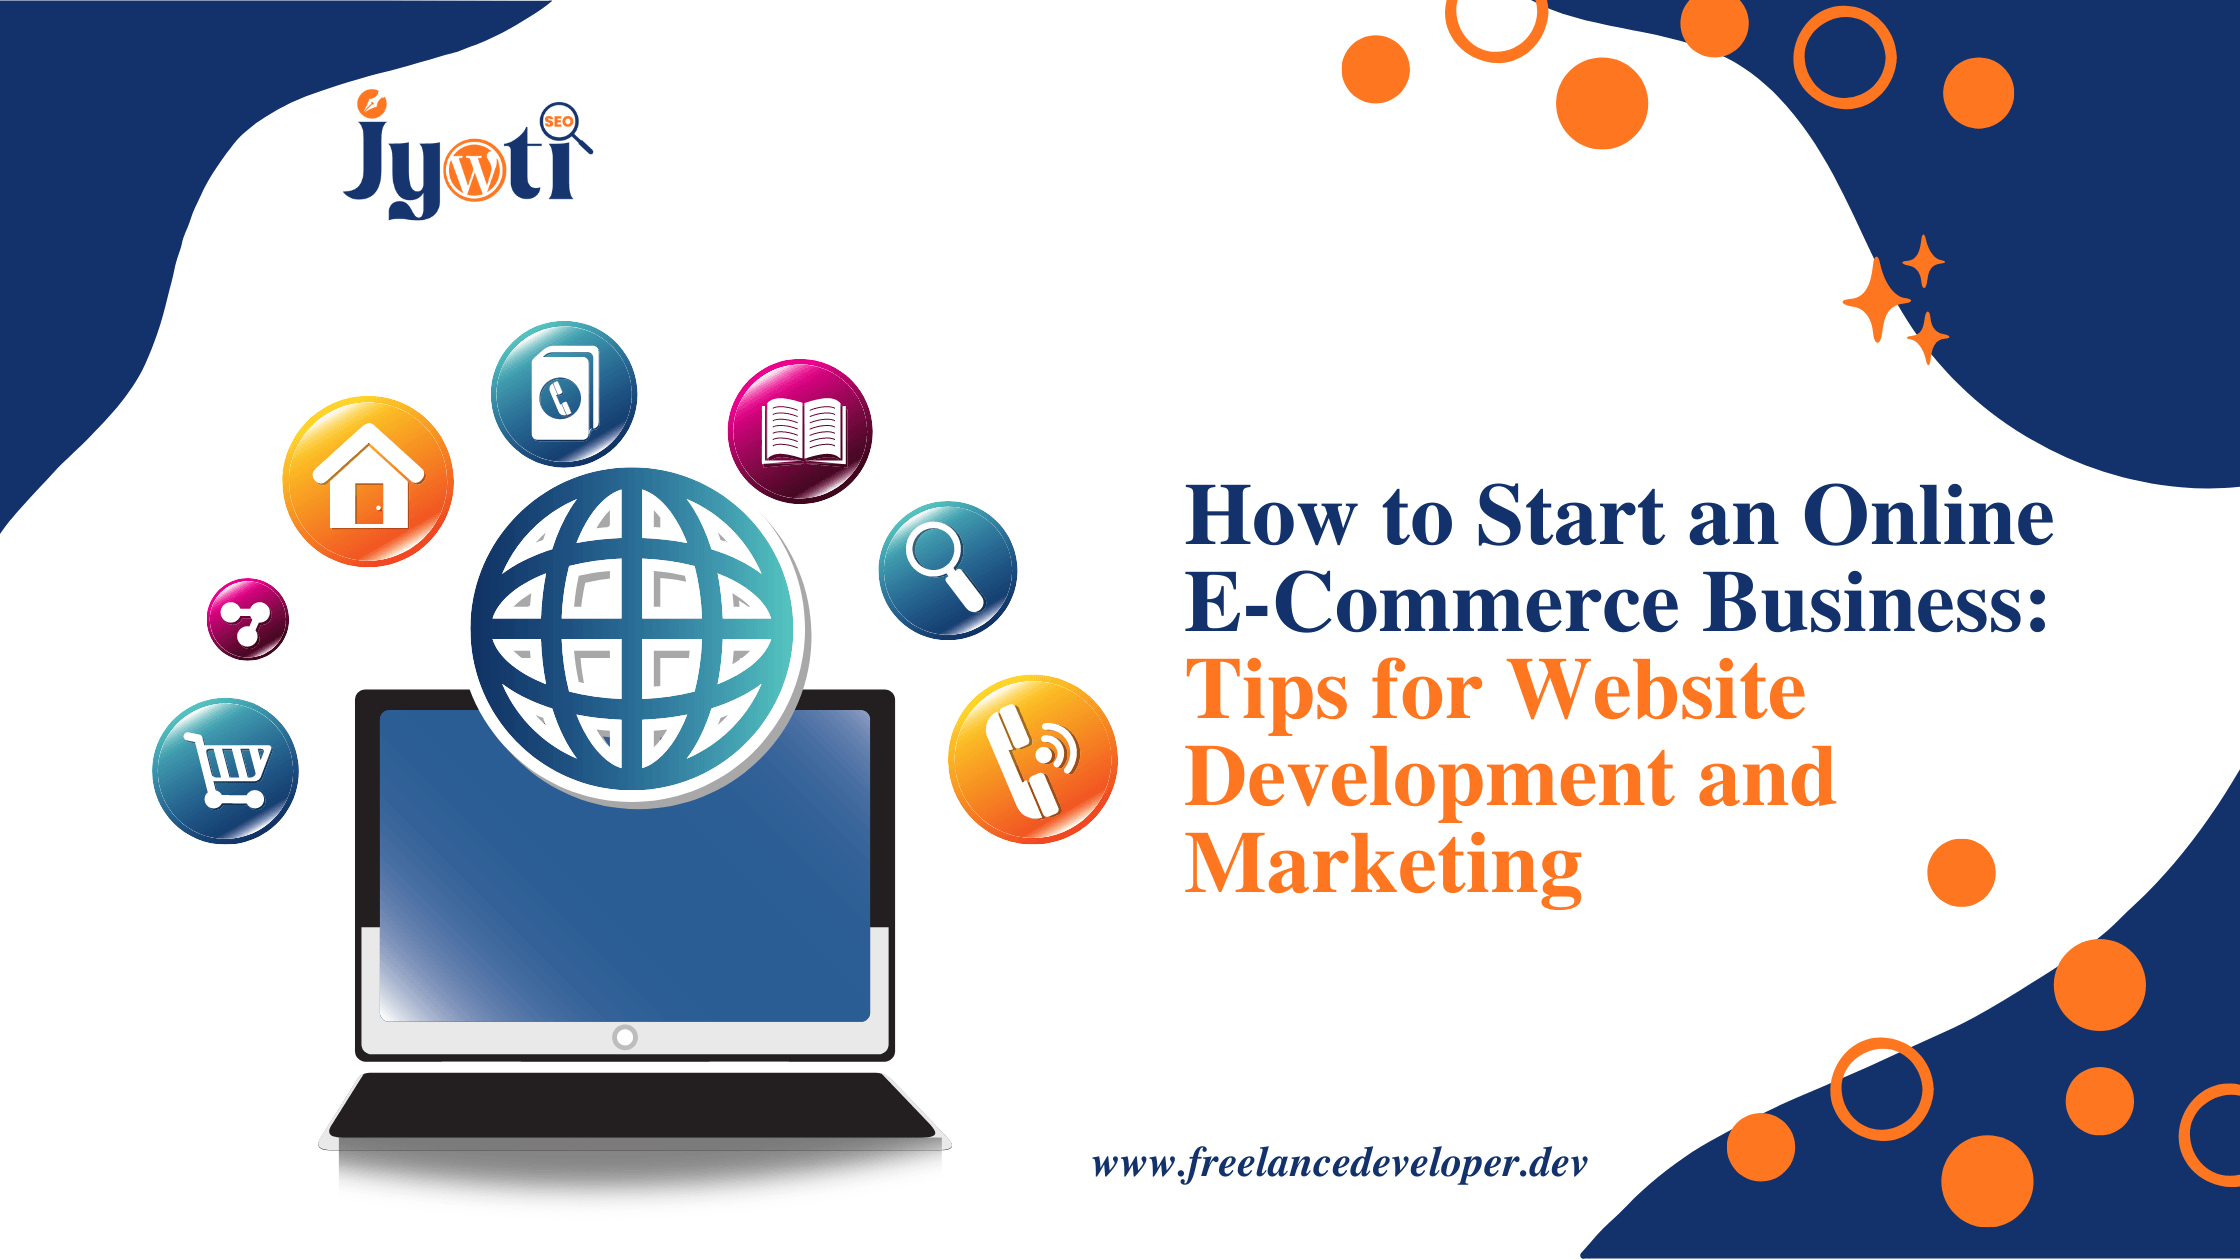 How to Start an Online E-Commerce Business: Tips for Website Development and Marketing